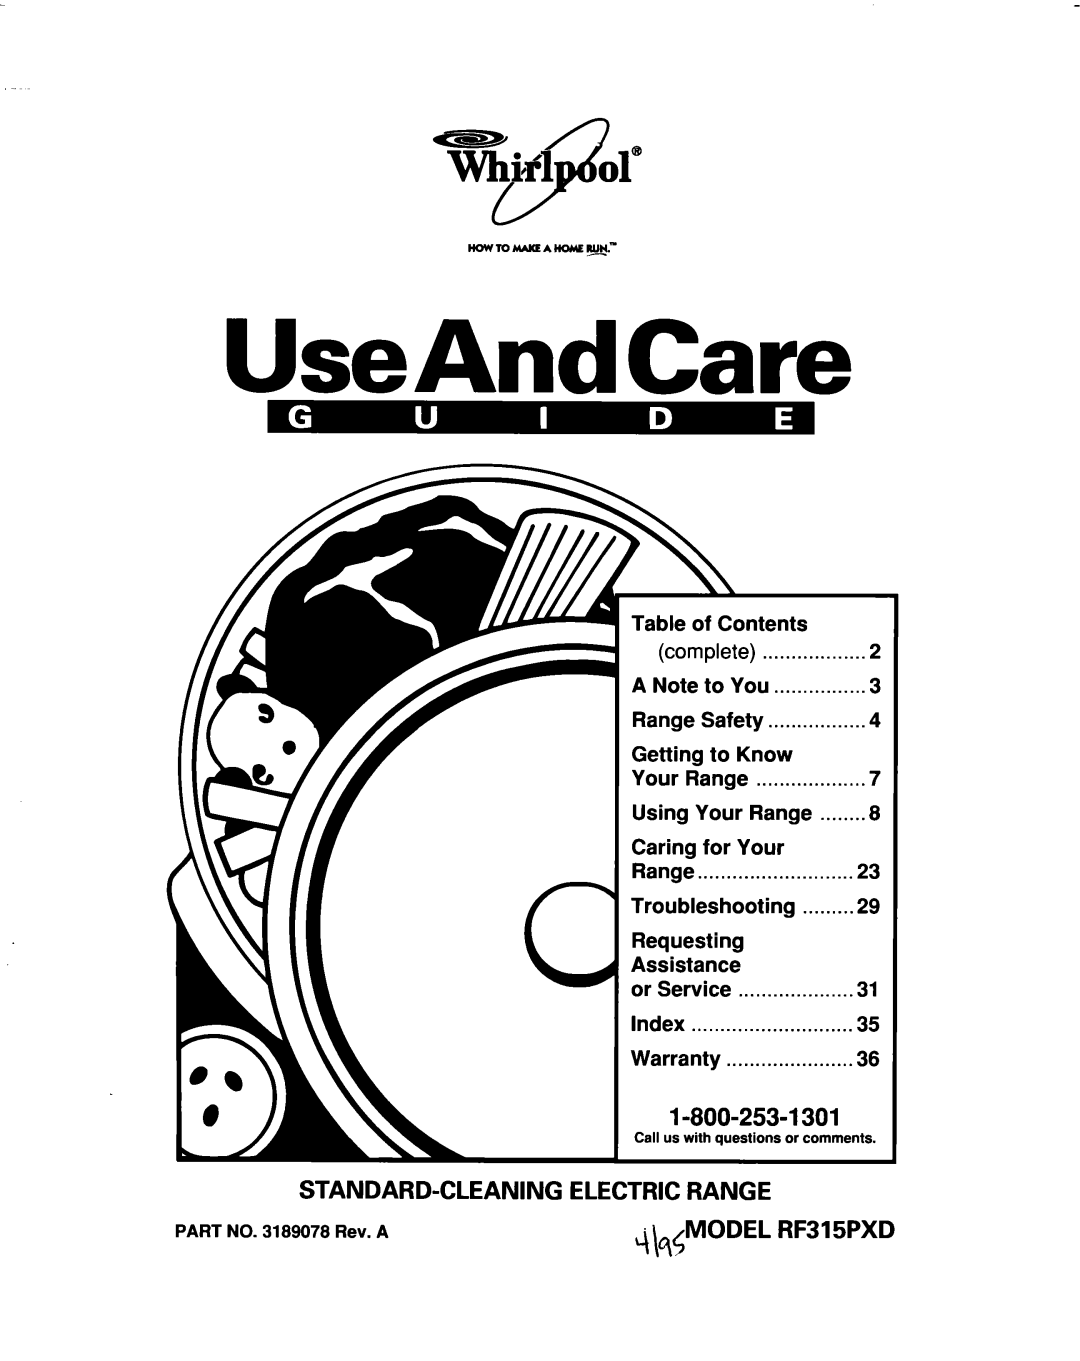 Whirlpool RF315PXD manual UseAndCare, Wh ol@, nowloMAKEAltoME~, Standard-Cleaningelectric Range 